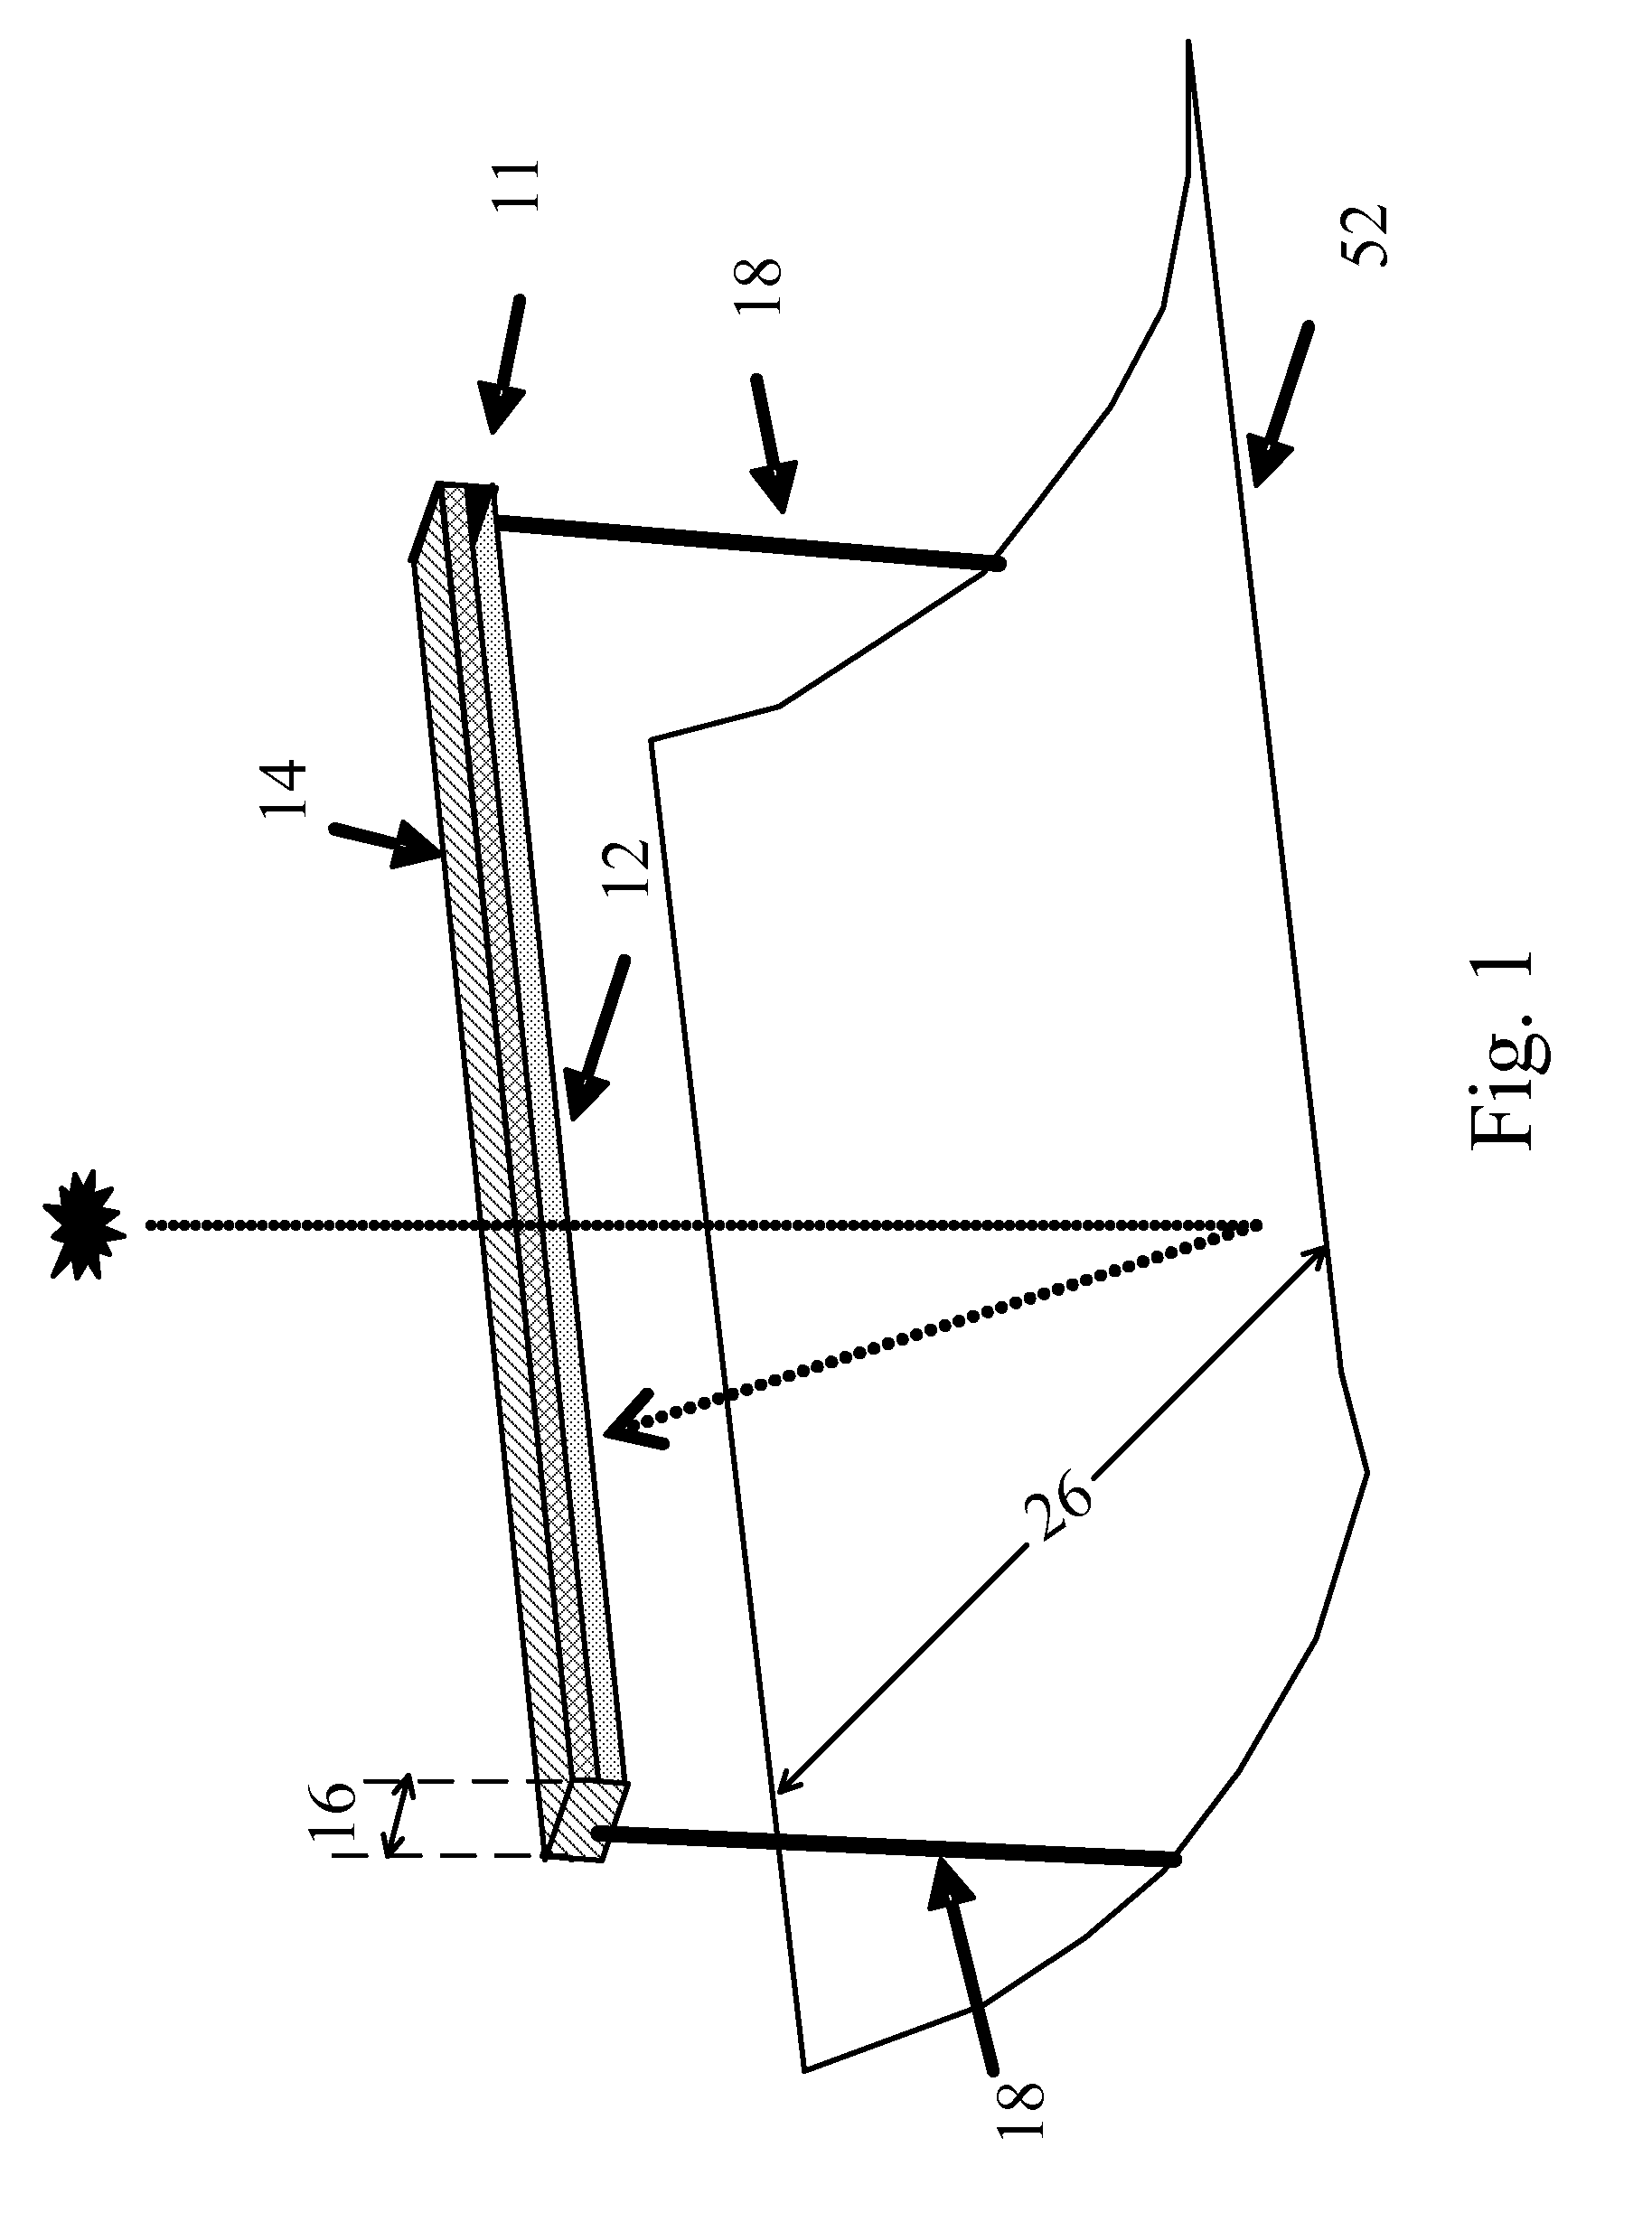 Method and Apparatus to Lower Cost Per Watt with Concentrated Linear Solar Panel